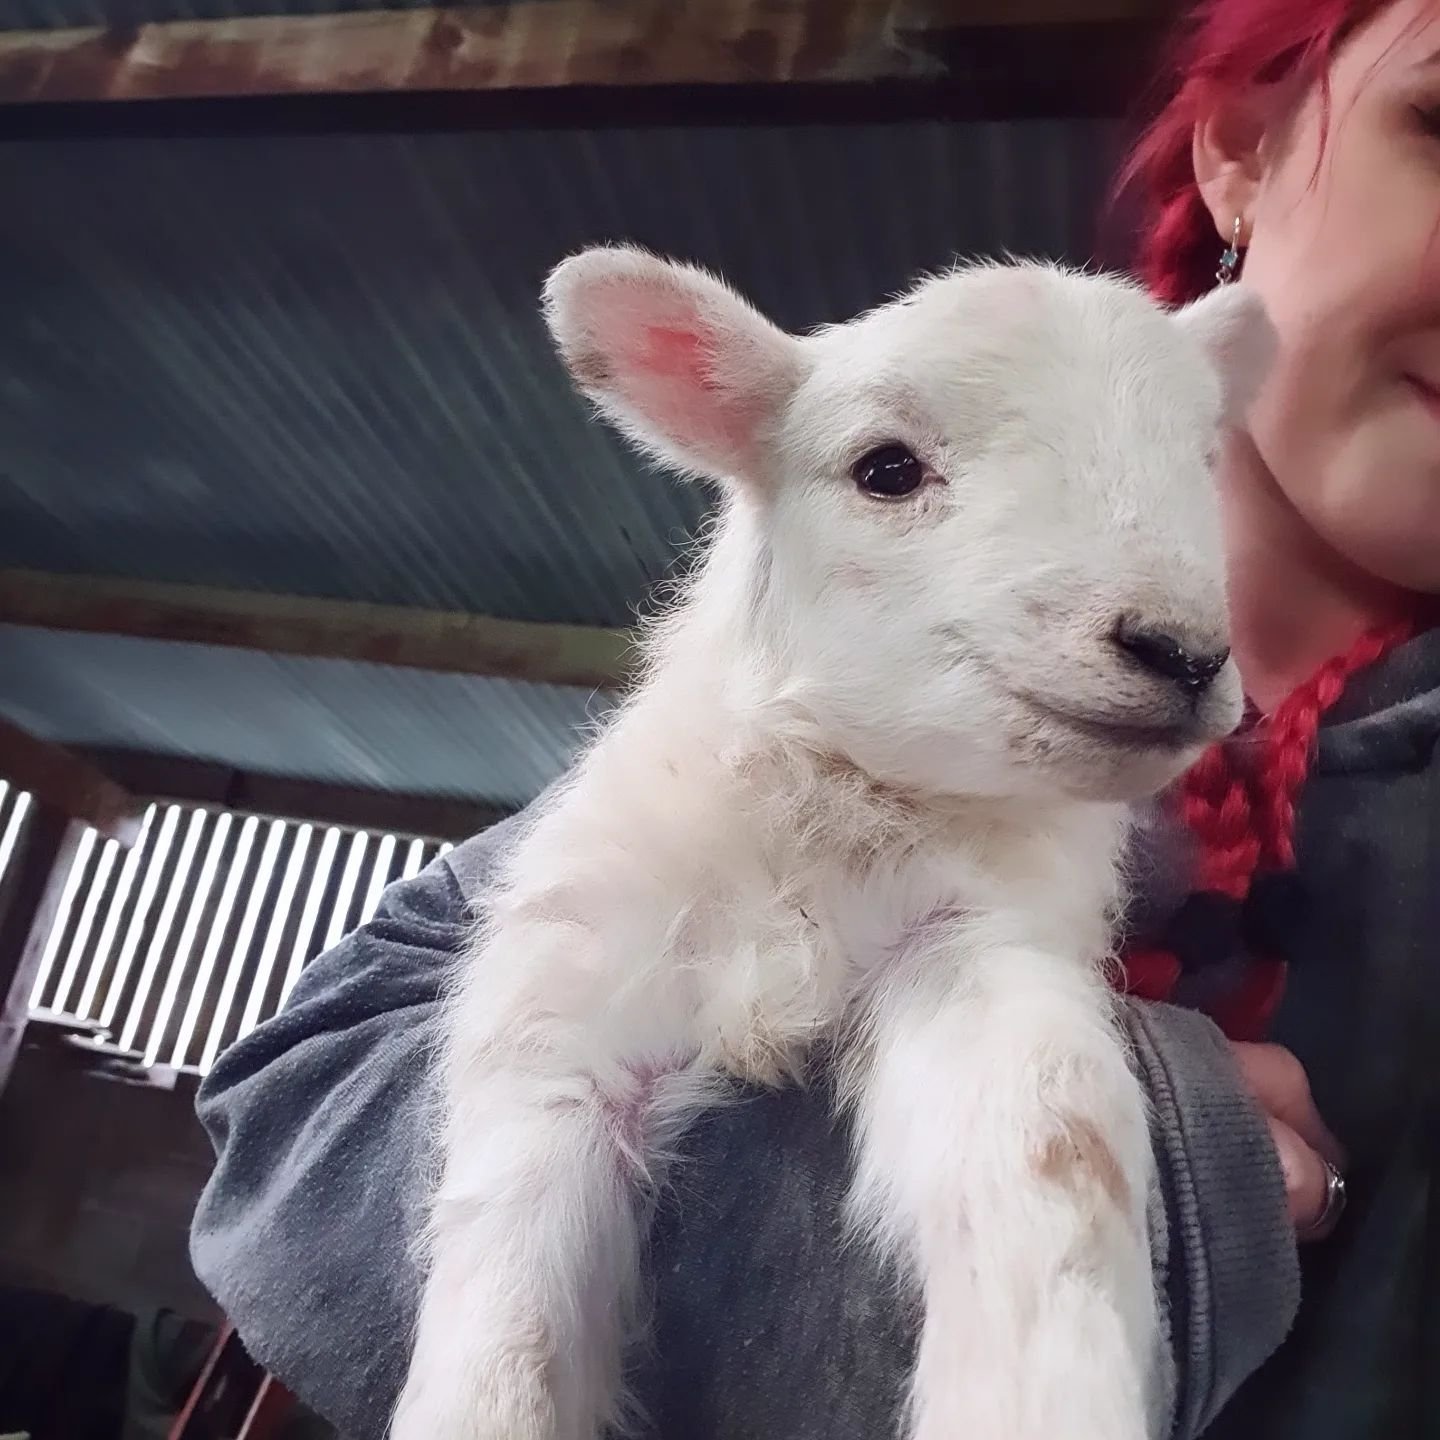 It's been a quiet few weeks on the flower front as we have been busy with a different kind of farming 🐑🐑🐑

#lambs #lambing #lamb #spring #lambingseason #lambingtime #lambing2024 #Wales #Carmarthenshire #welshlamb #hillfarm #babyanimals #cute #shee